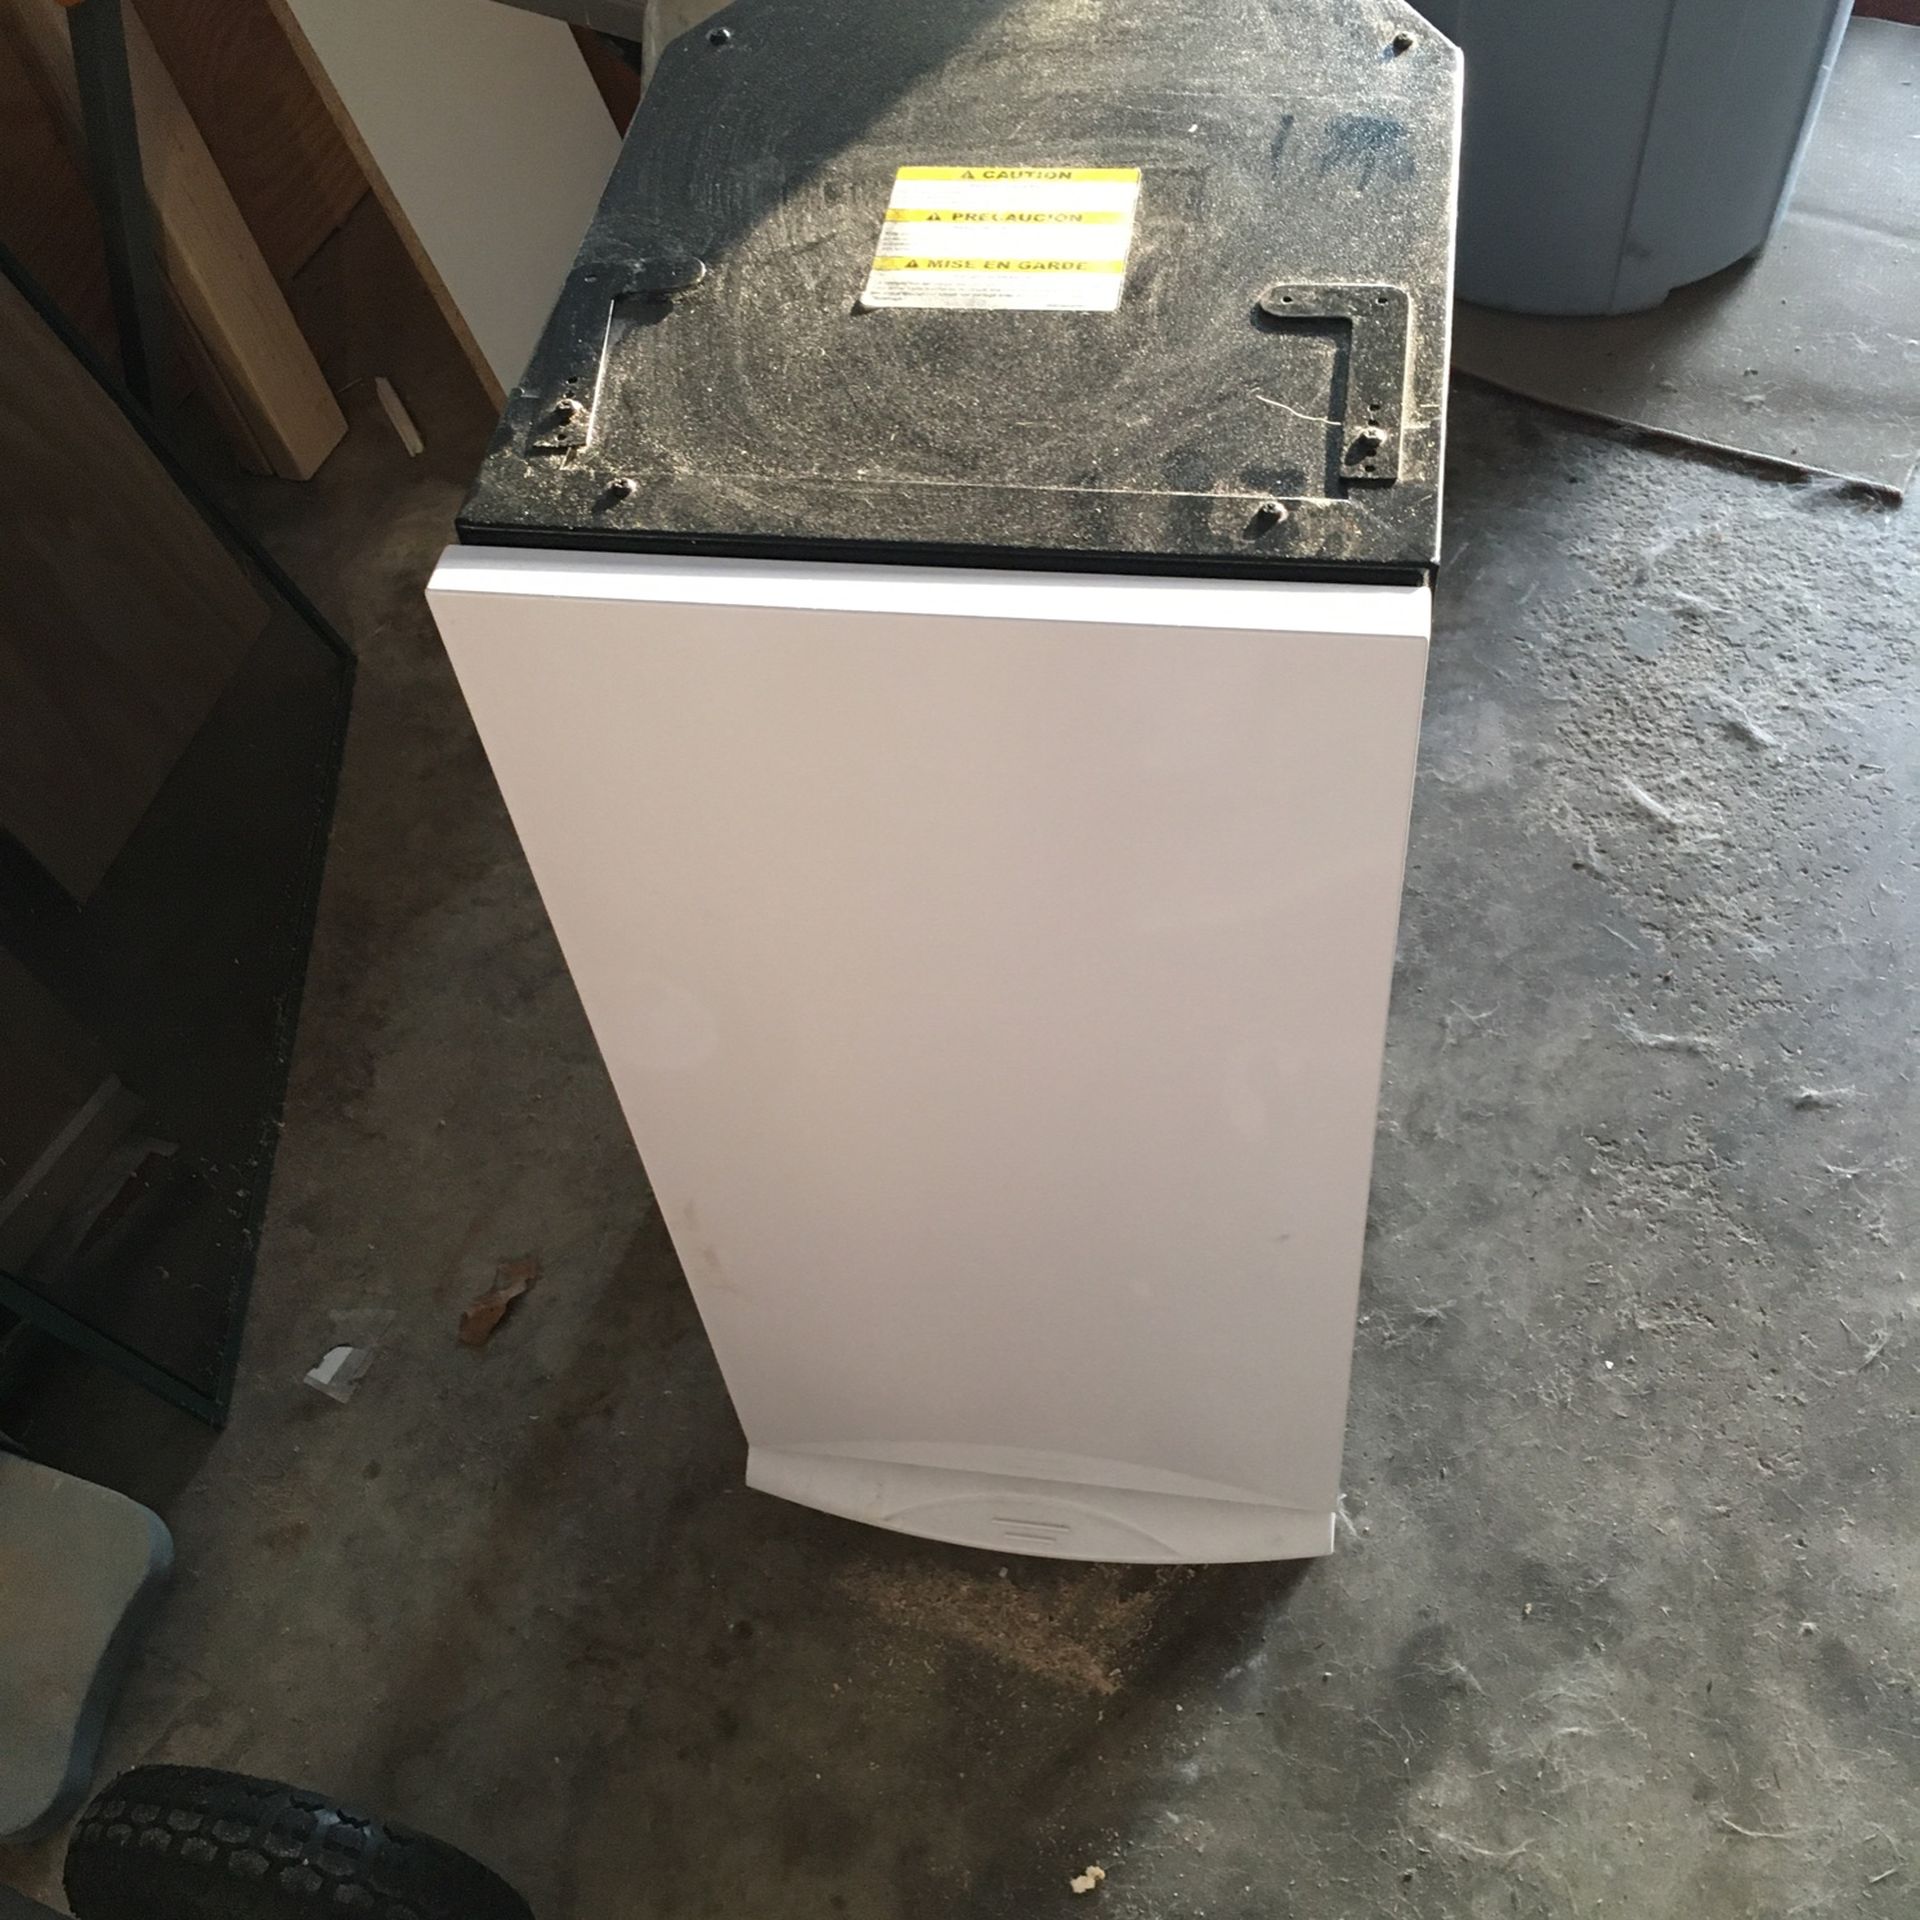 Trash compactor General Electric UCG 1(contact info removed) series